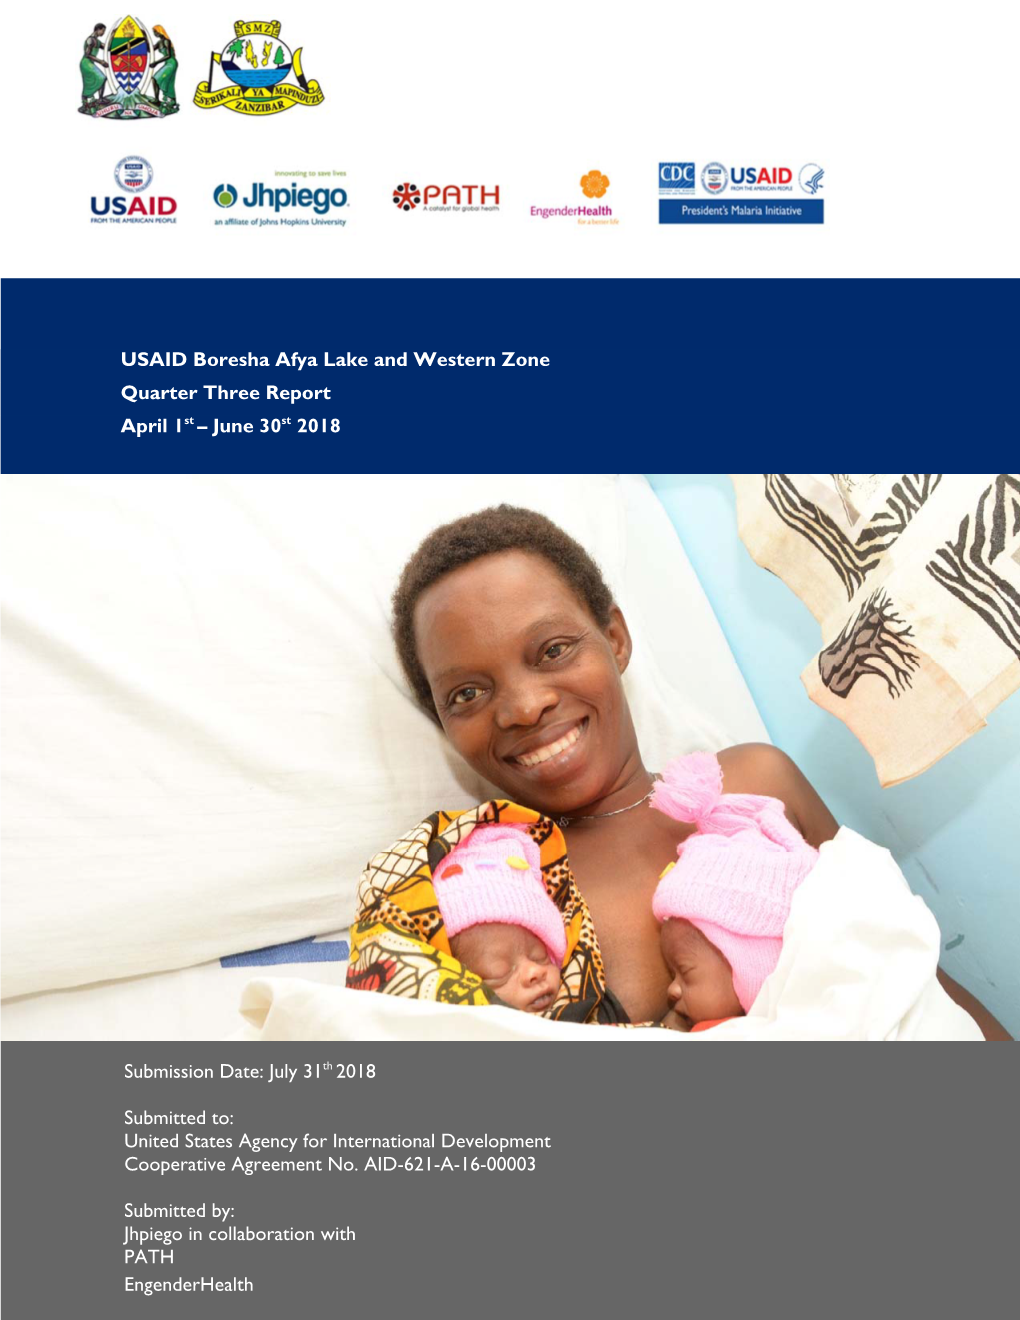 USAID Boresha Afya Lake and Western Zone Quarter Three Report April 1St – June 30St 2018